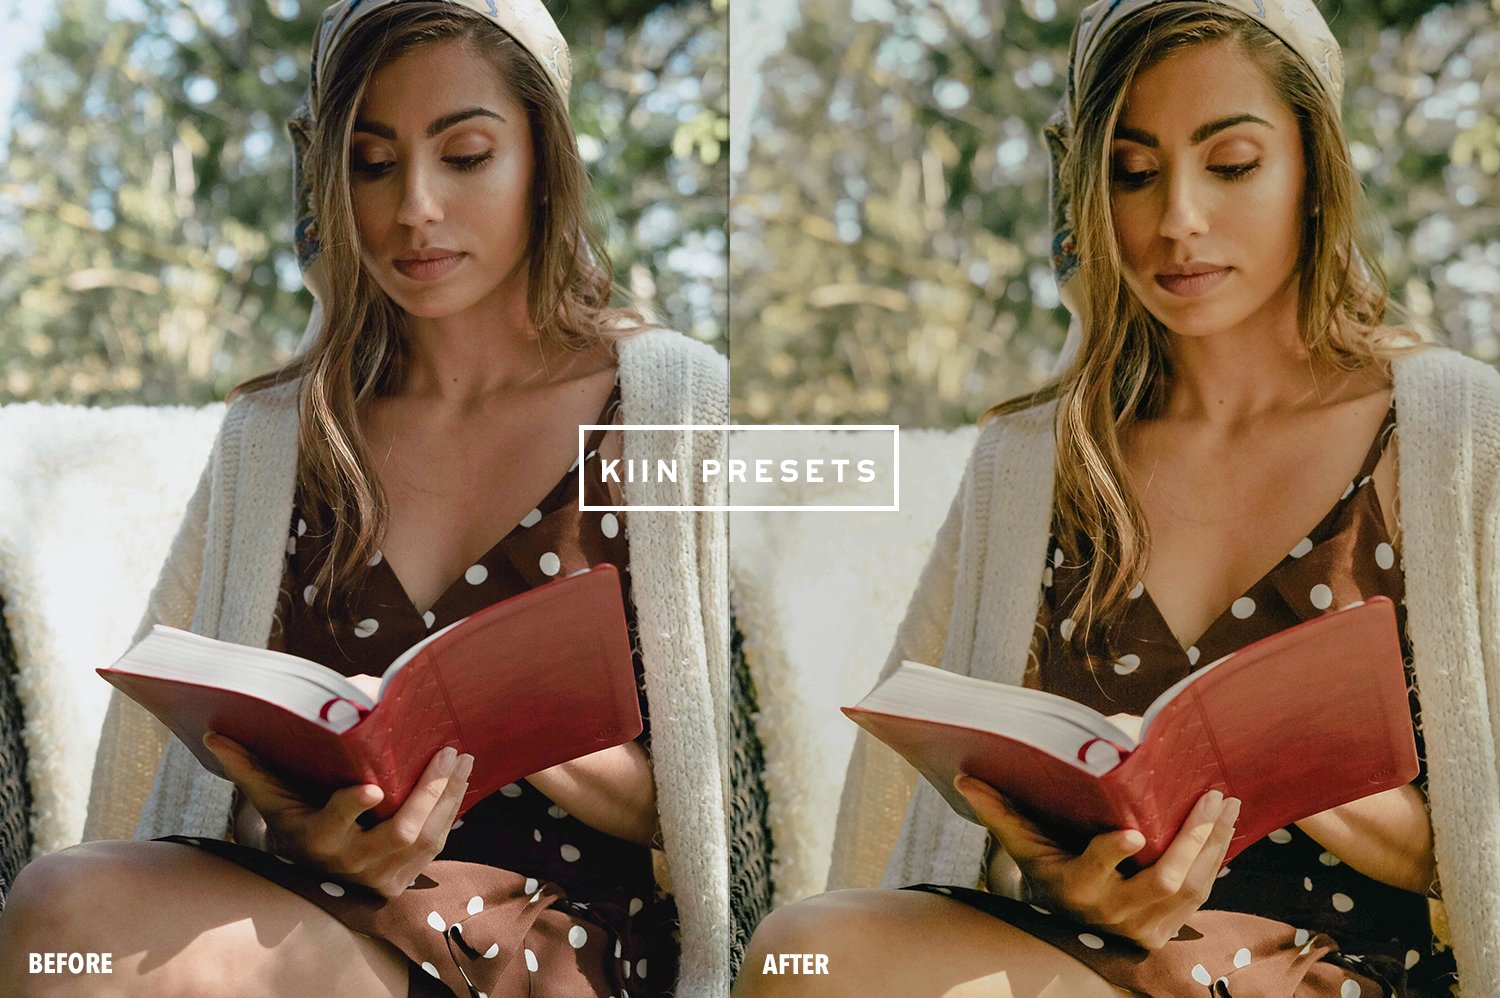 07kiin lightroom presets outdoor presets outdoor filter farm presets blogger filter cottagecore presets country aesthetic presets family presets 273